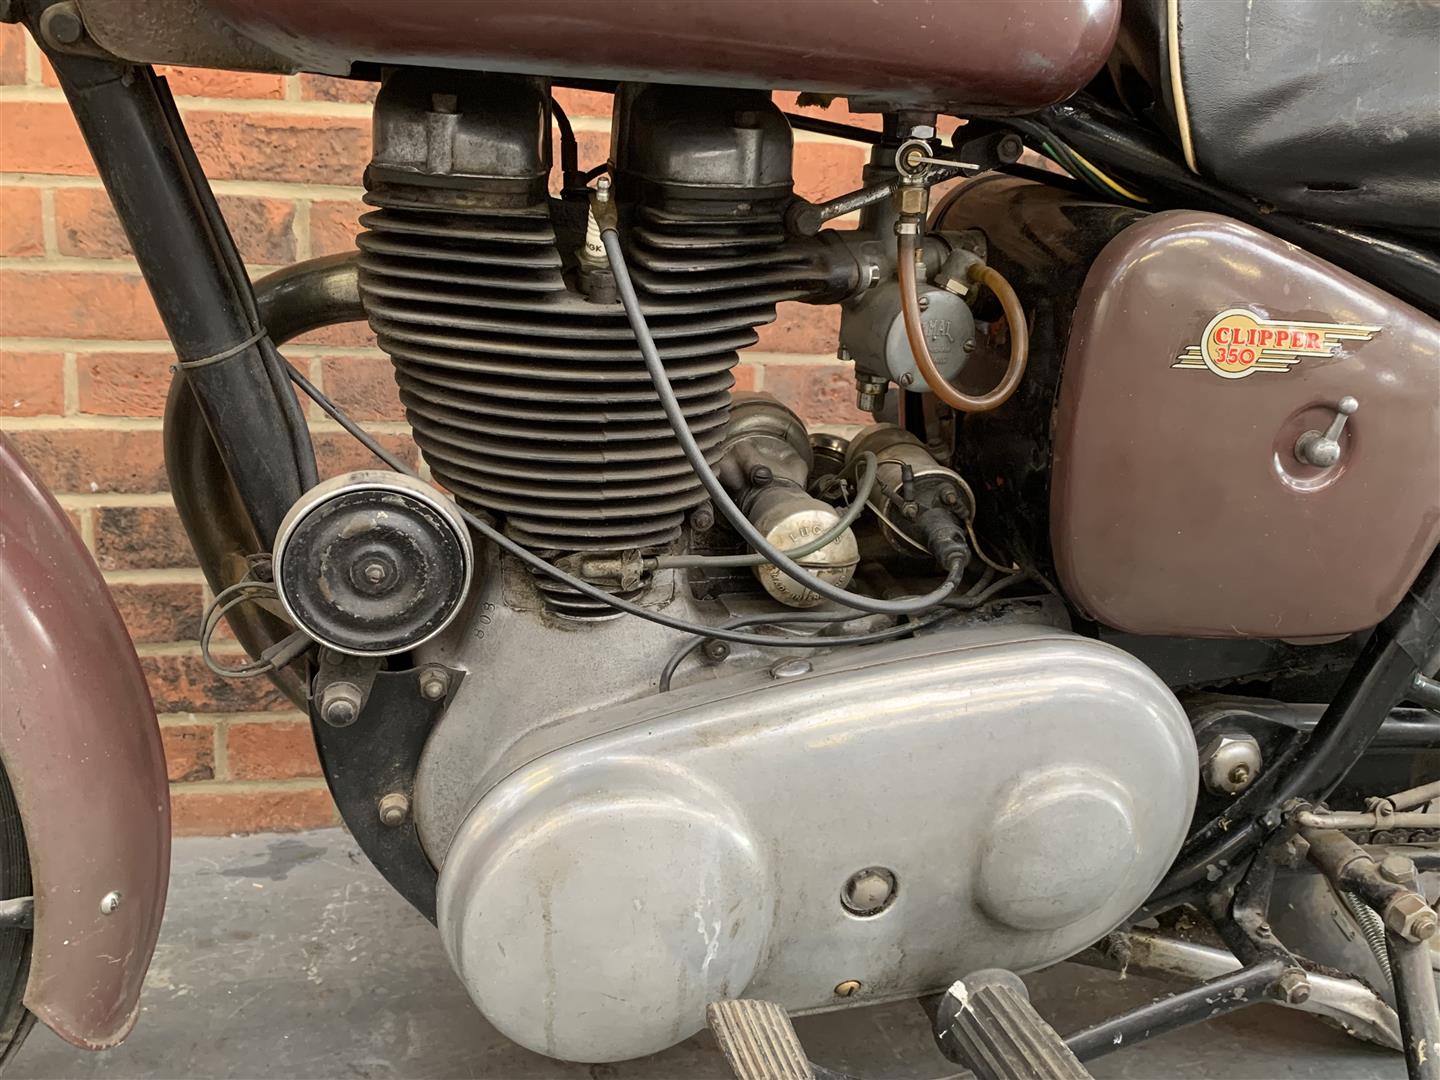 1959 Royal Enfield Clipper 350cc - Image 5 of 16